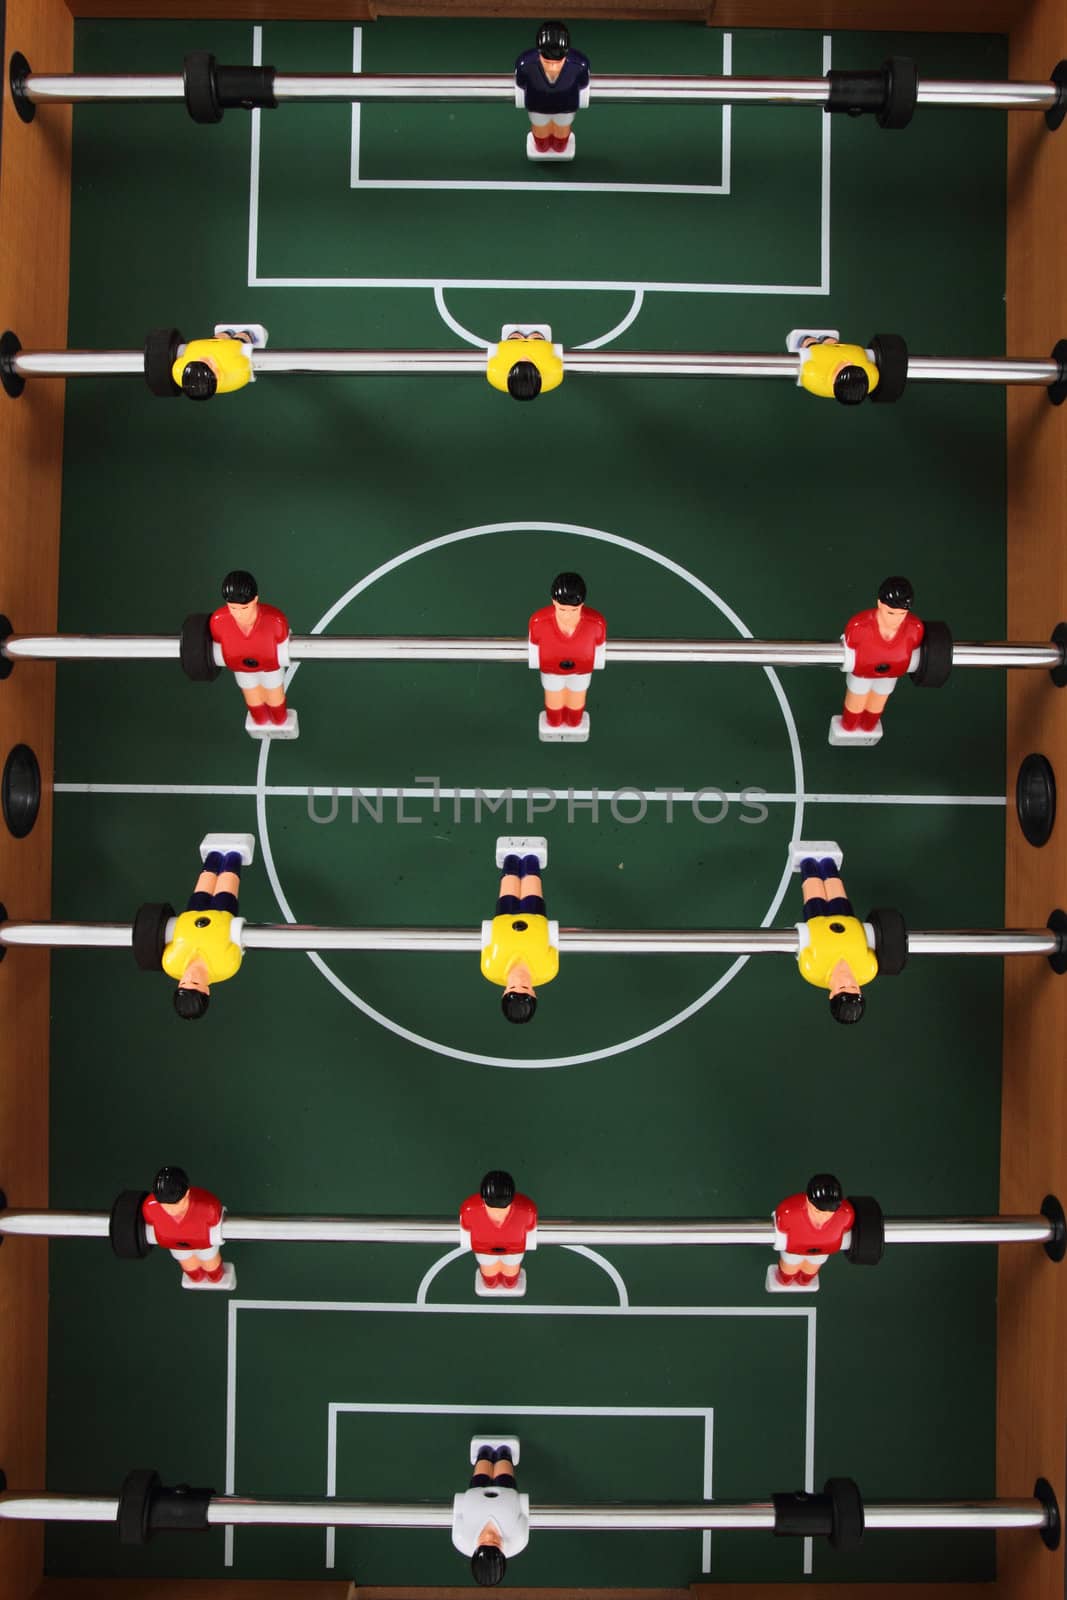 table soccer game as very nice sport background